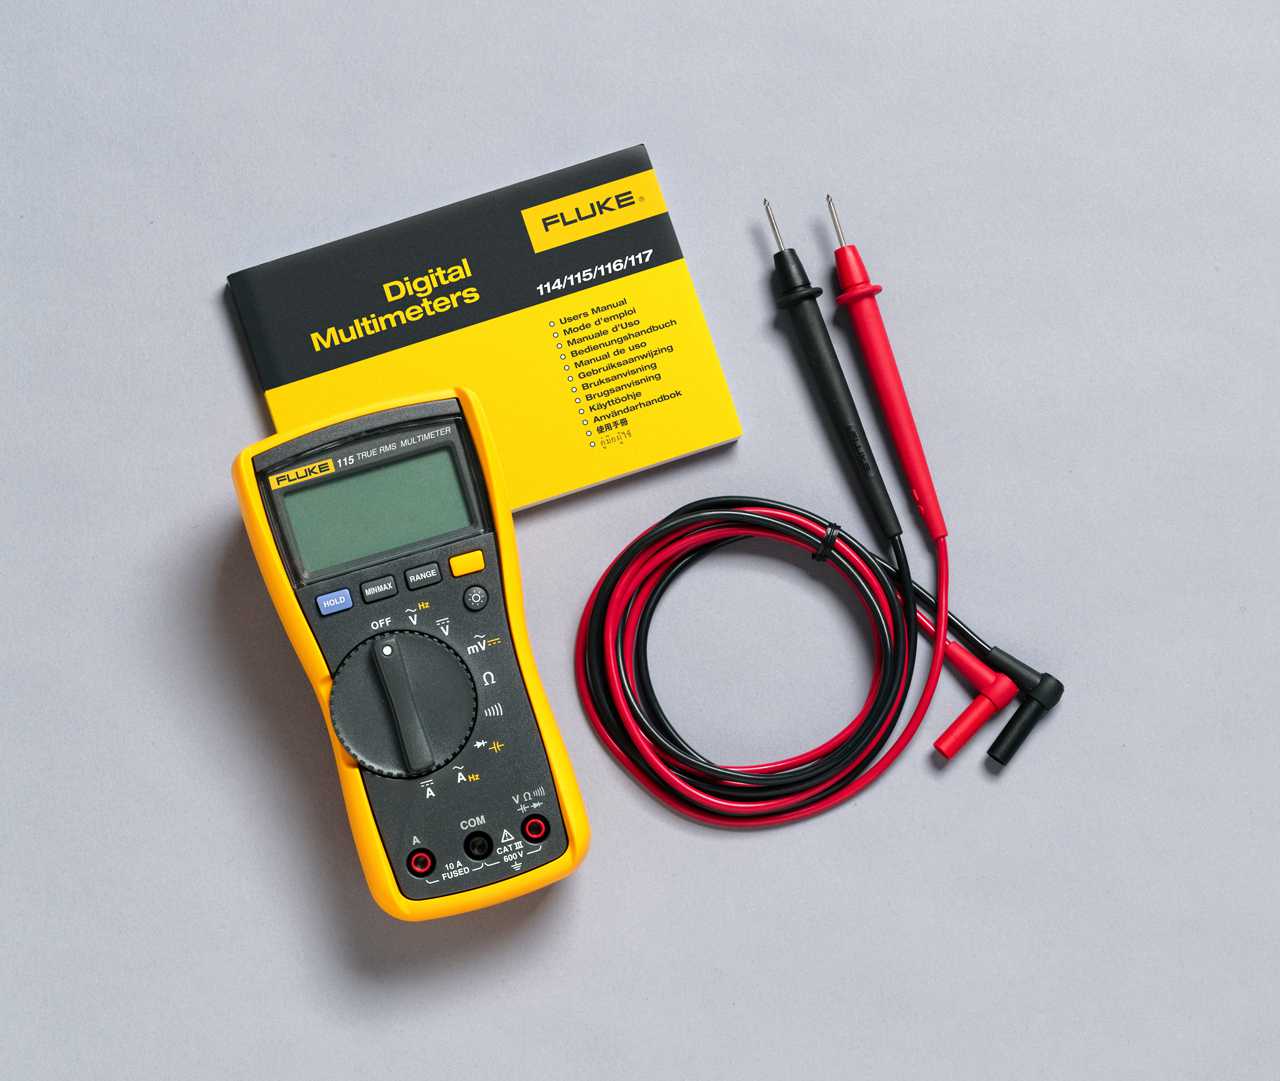 Fluke 115 TRMS Delivery Package